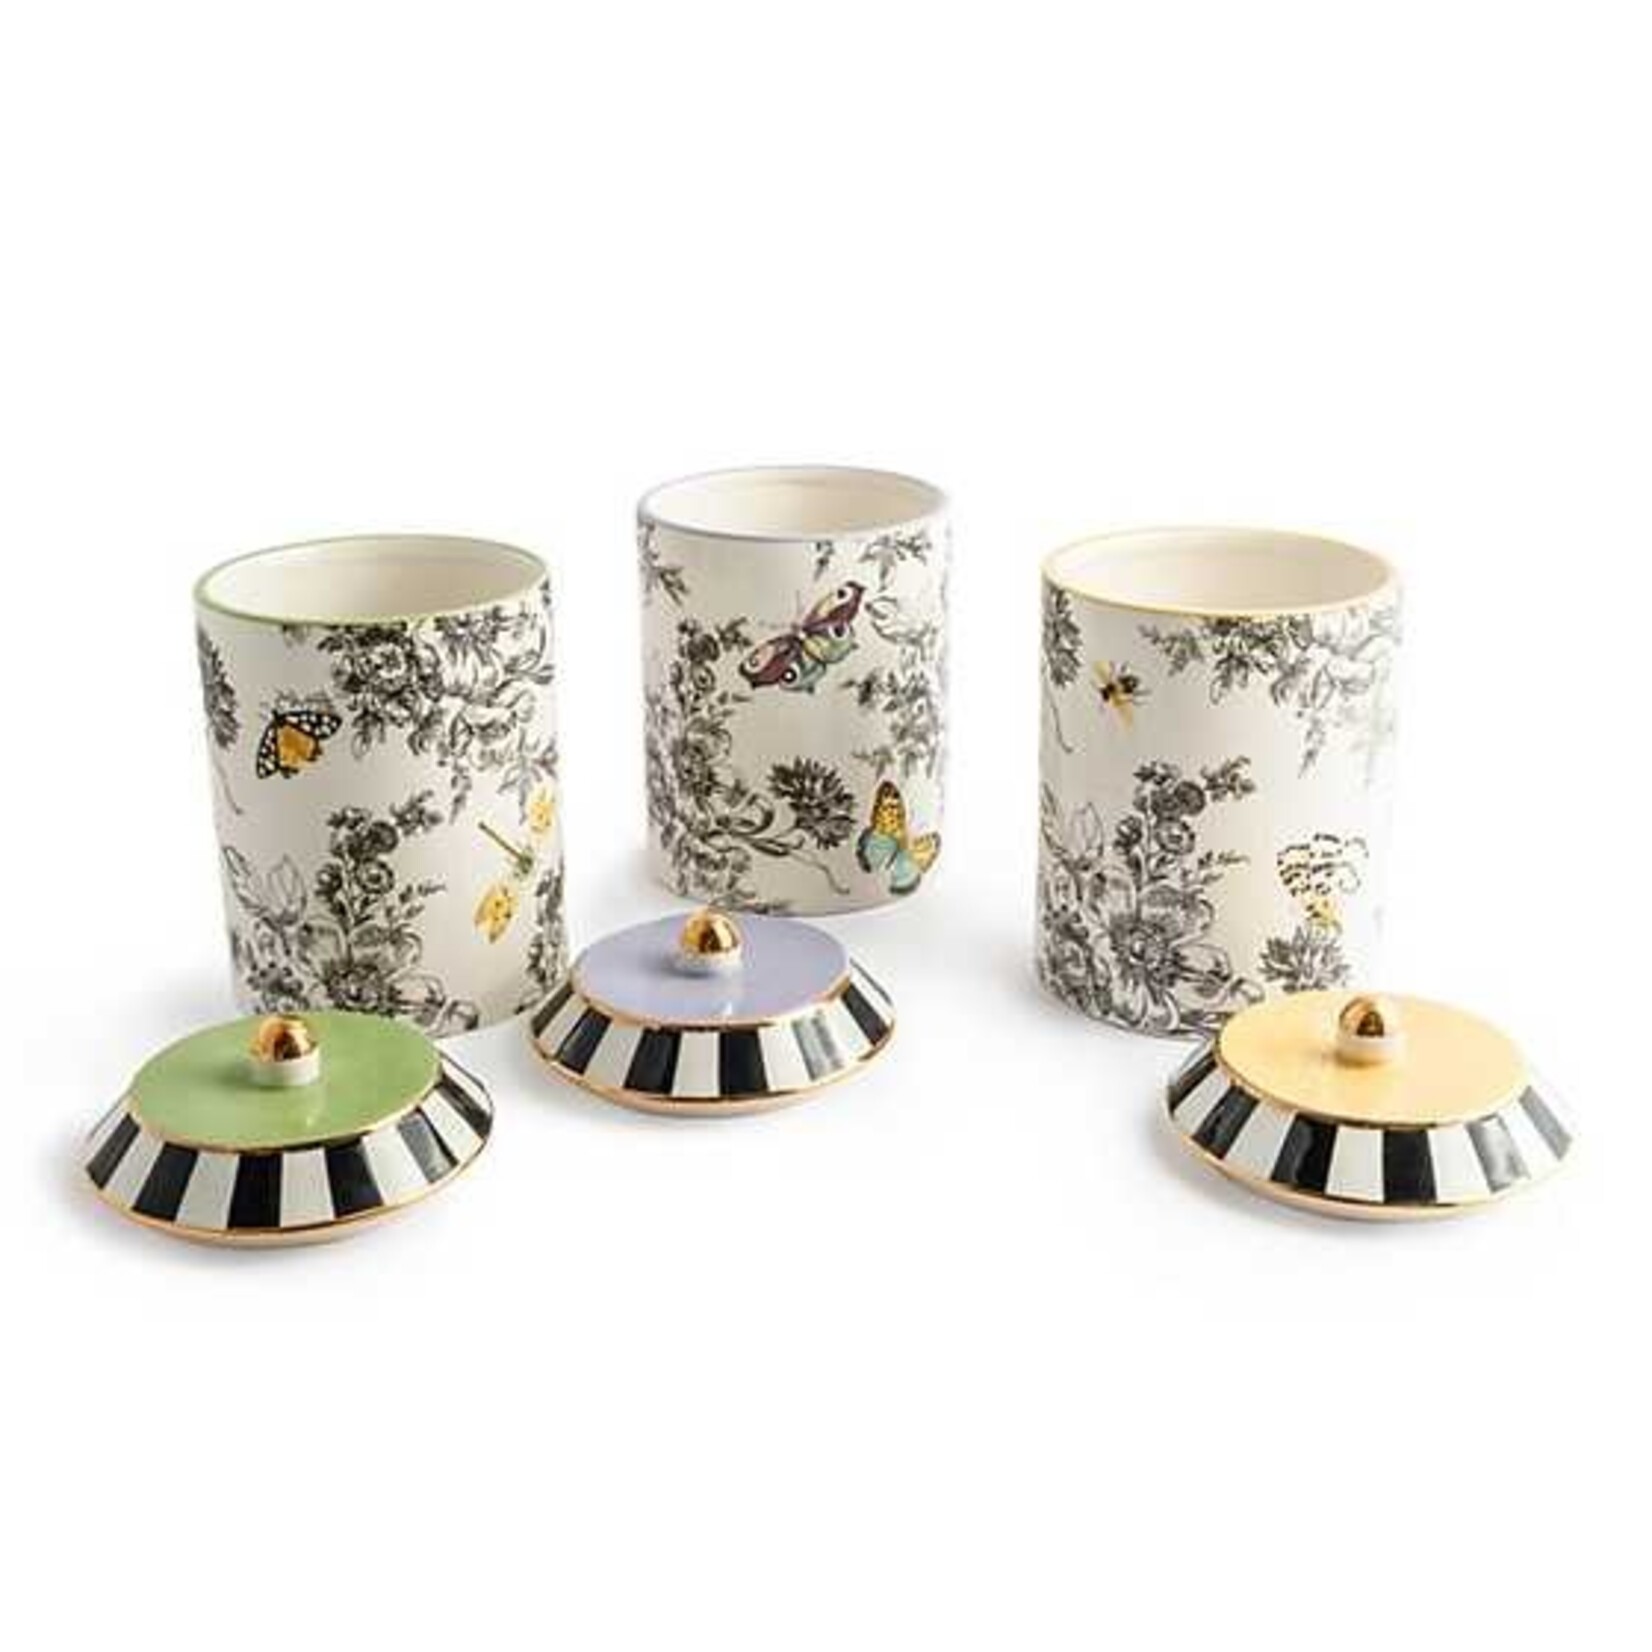 MacKenzie-Childs Butterfly Toile Canisters - Set of 3